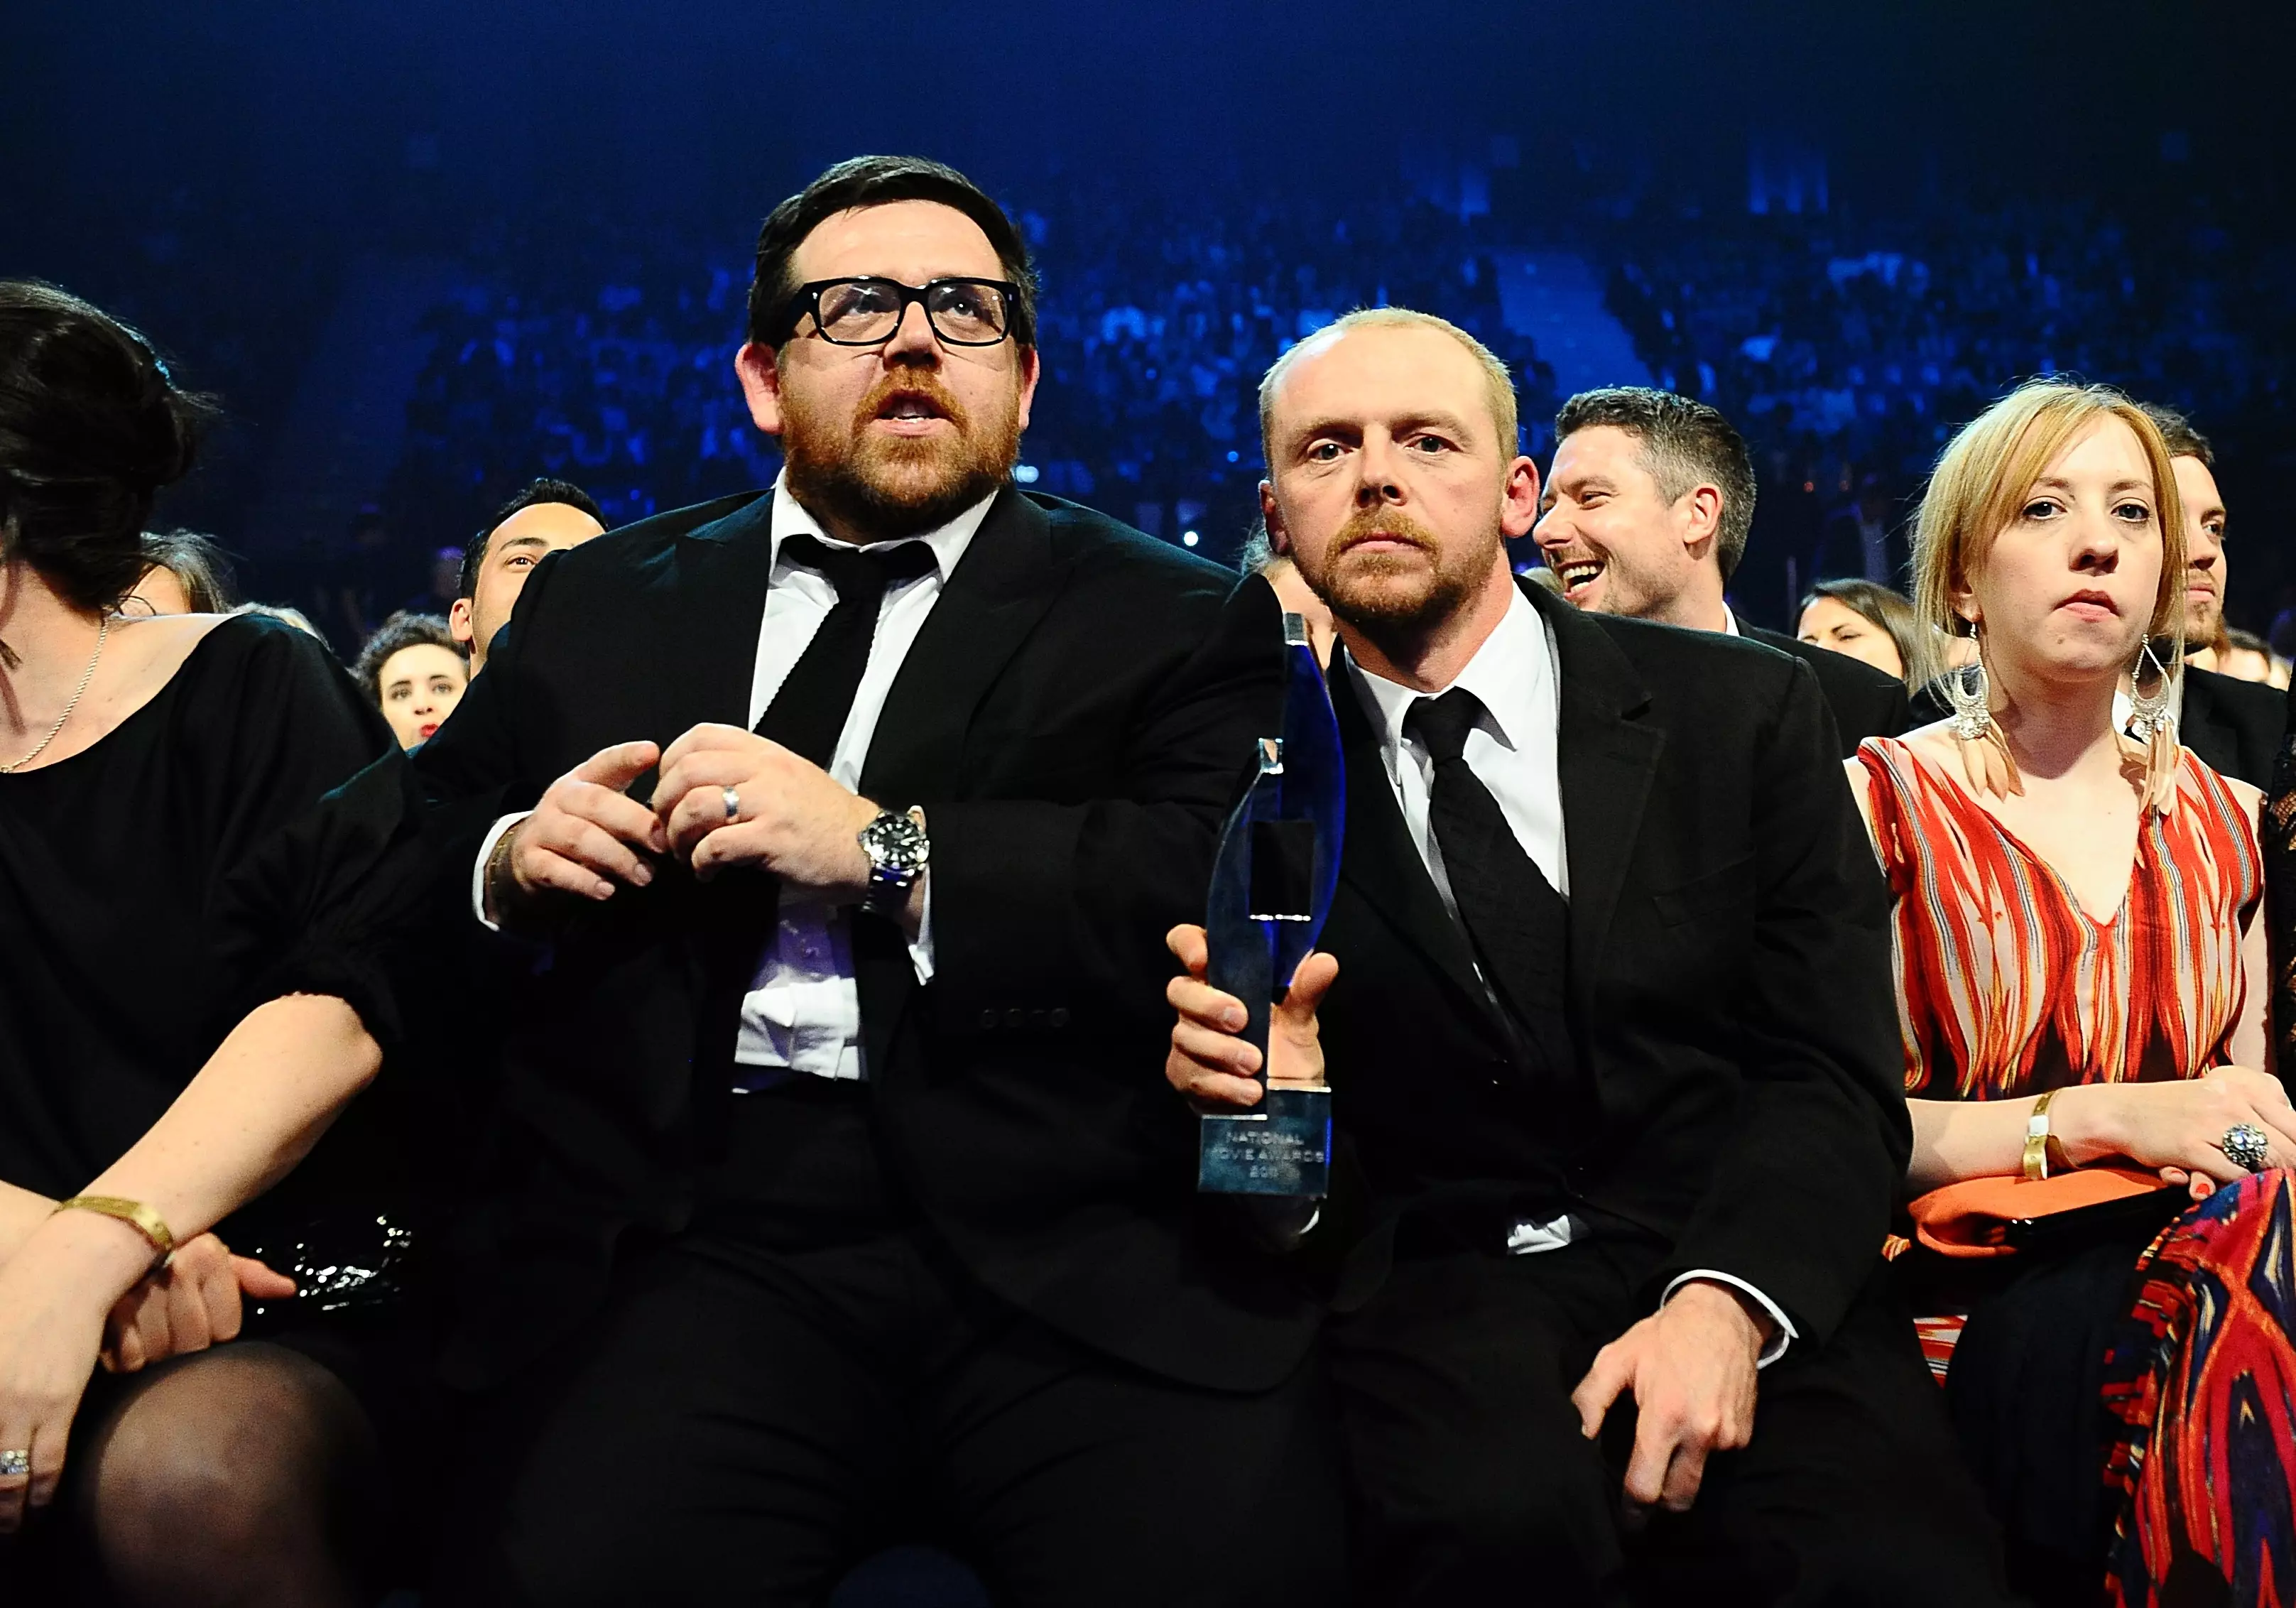 Simon Pegg and Nick Frost are reuniting for a new series about ghost hunting.